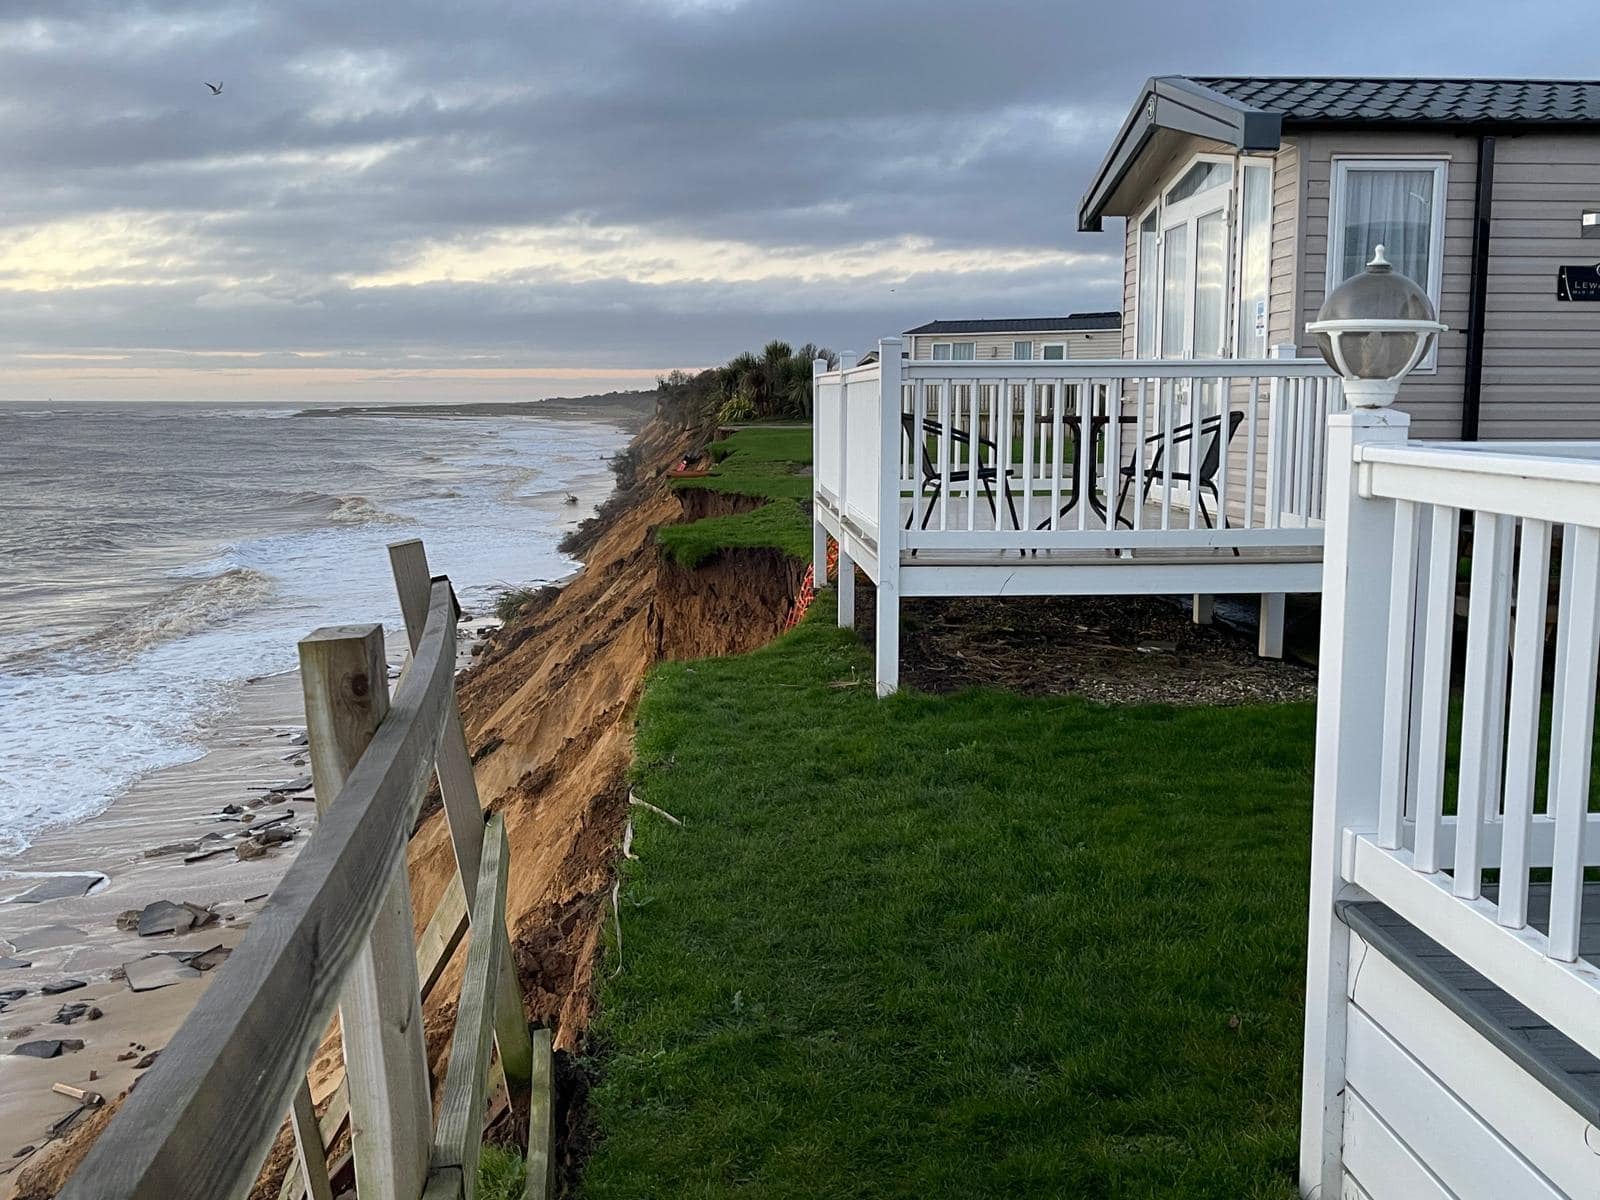 A road has partially collapsed due to high tides and wind leaving caravans exposed